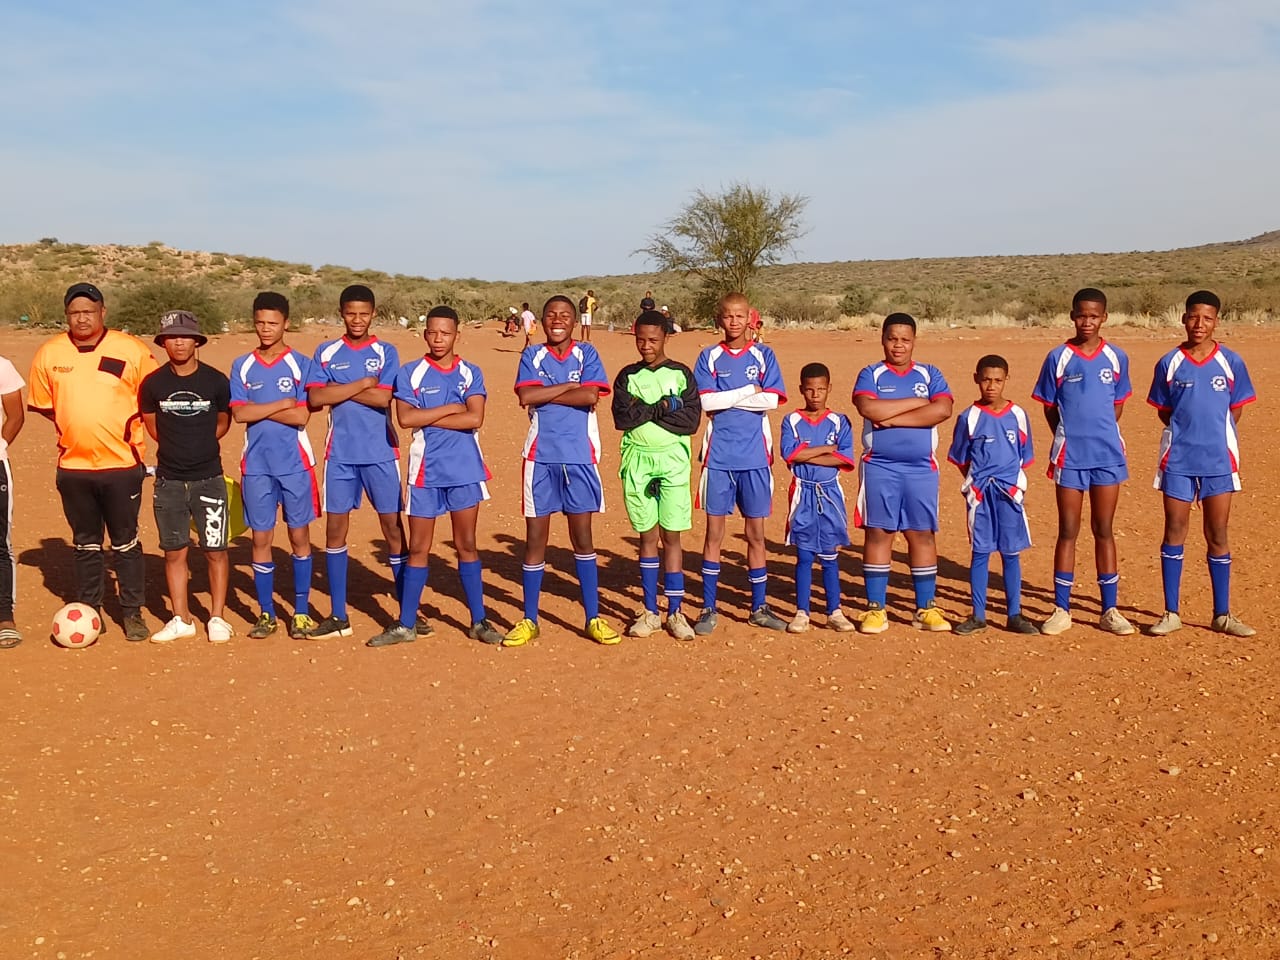 Northern Cape’s Sporting Talent Pleads for Better Infrastructure